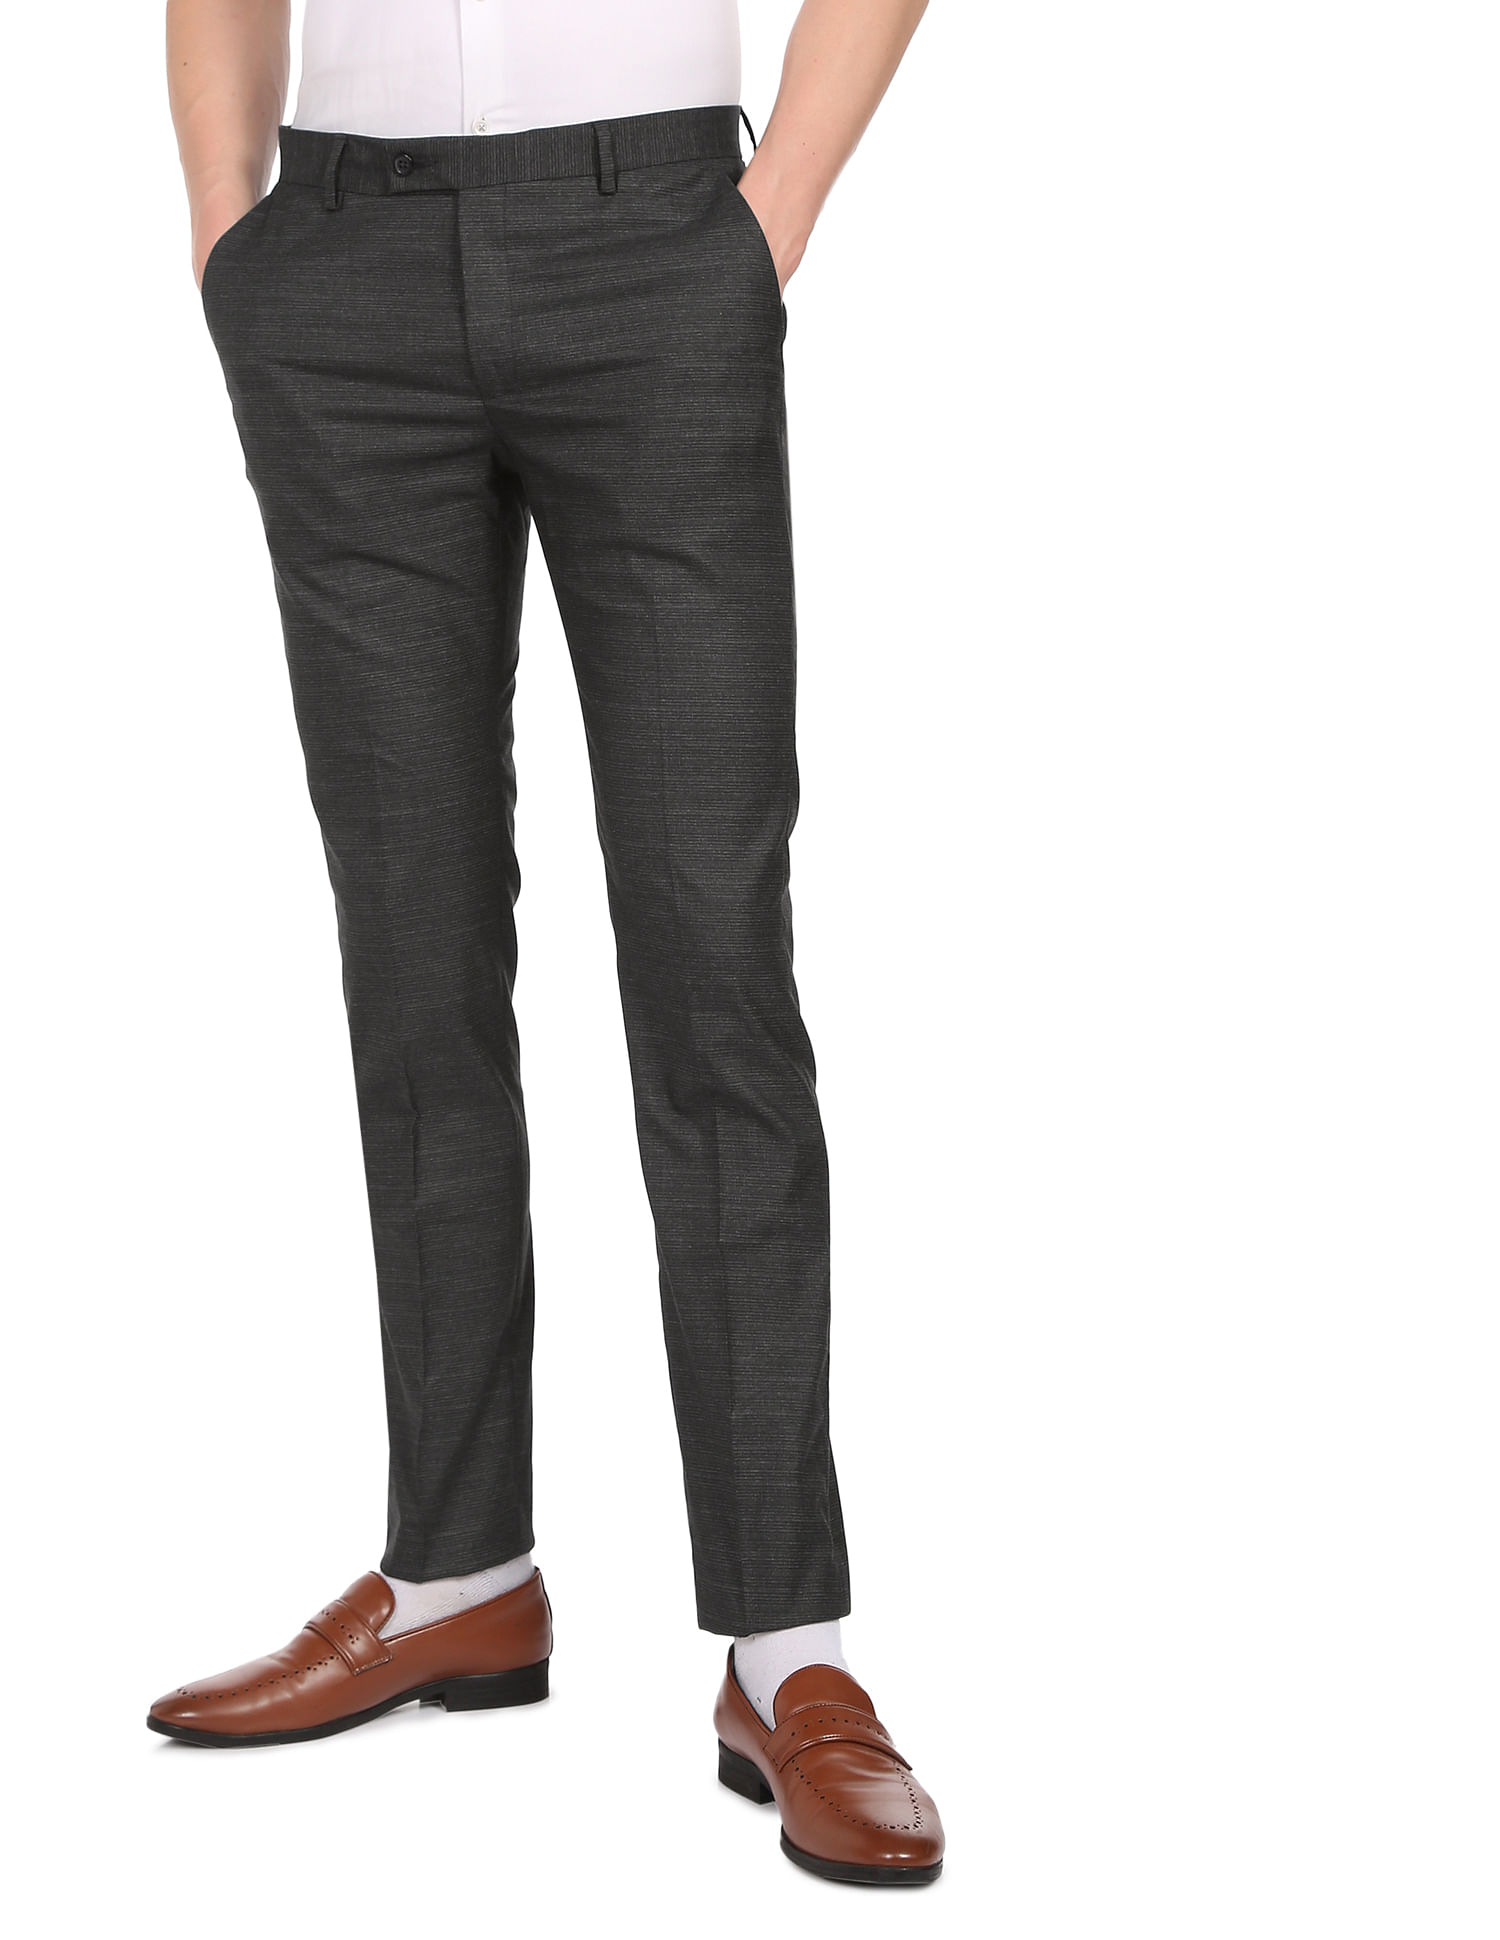 Peter England Formal Trousers  Buy Peter England Men Beige Textured Slim  Fit Formal Trousers Online  Nykaa Fashion